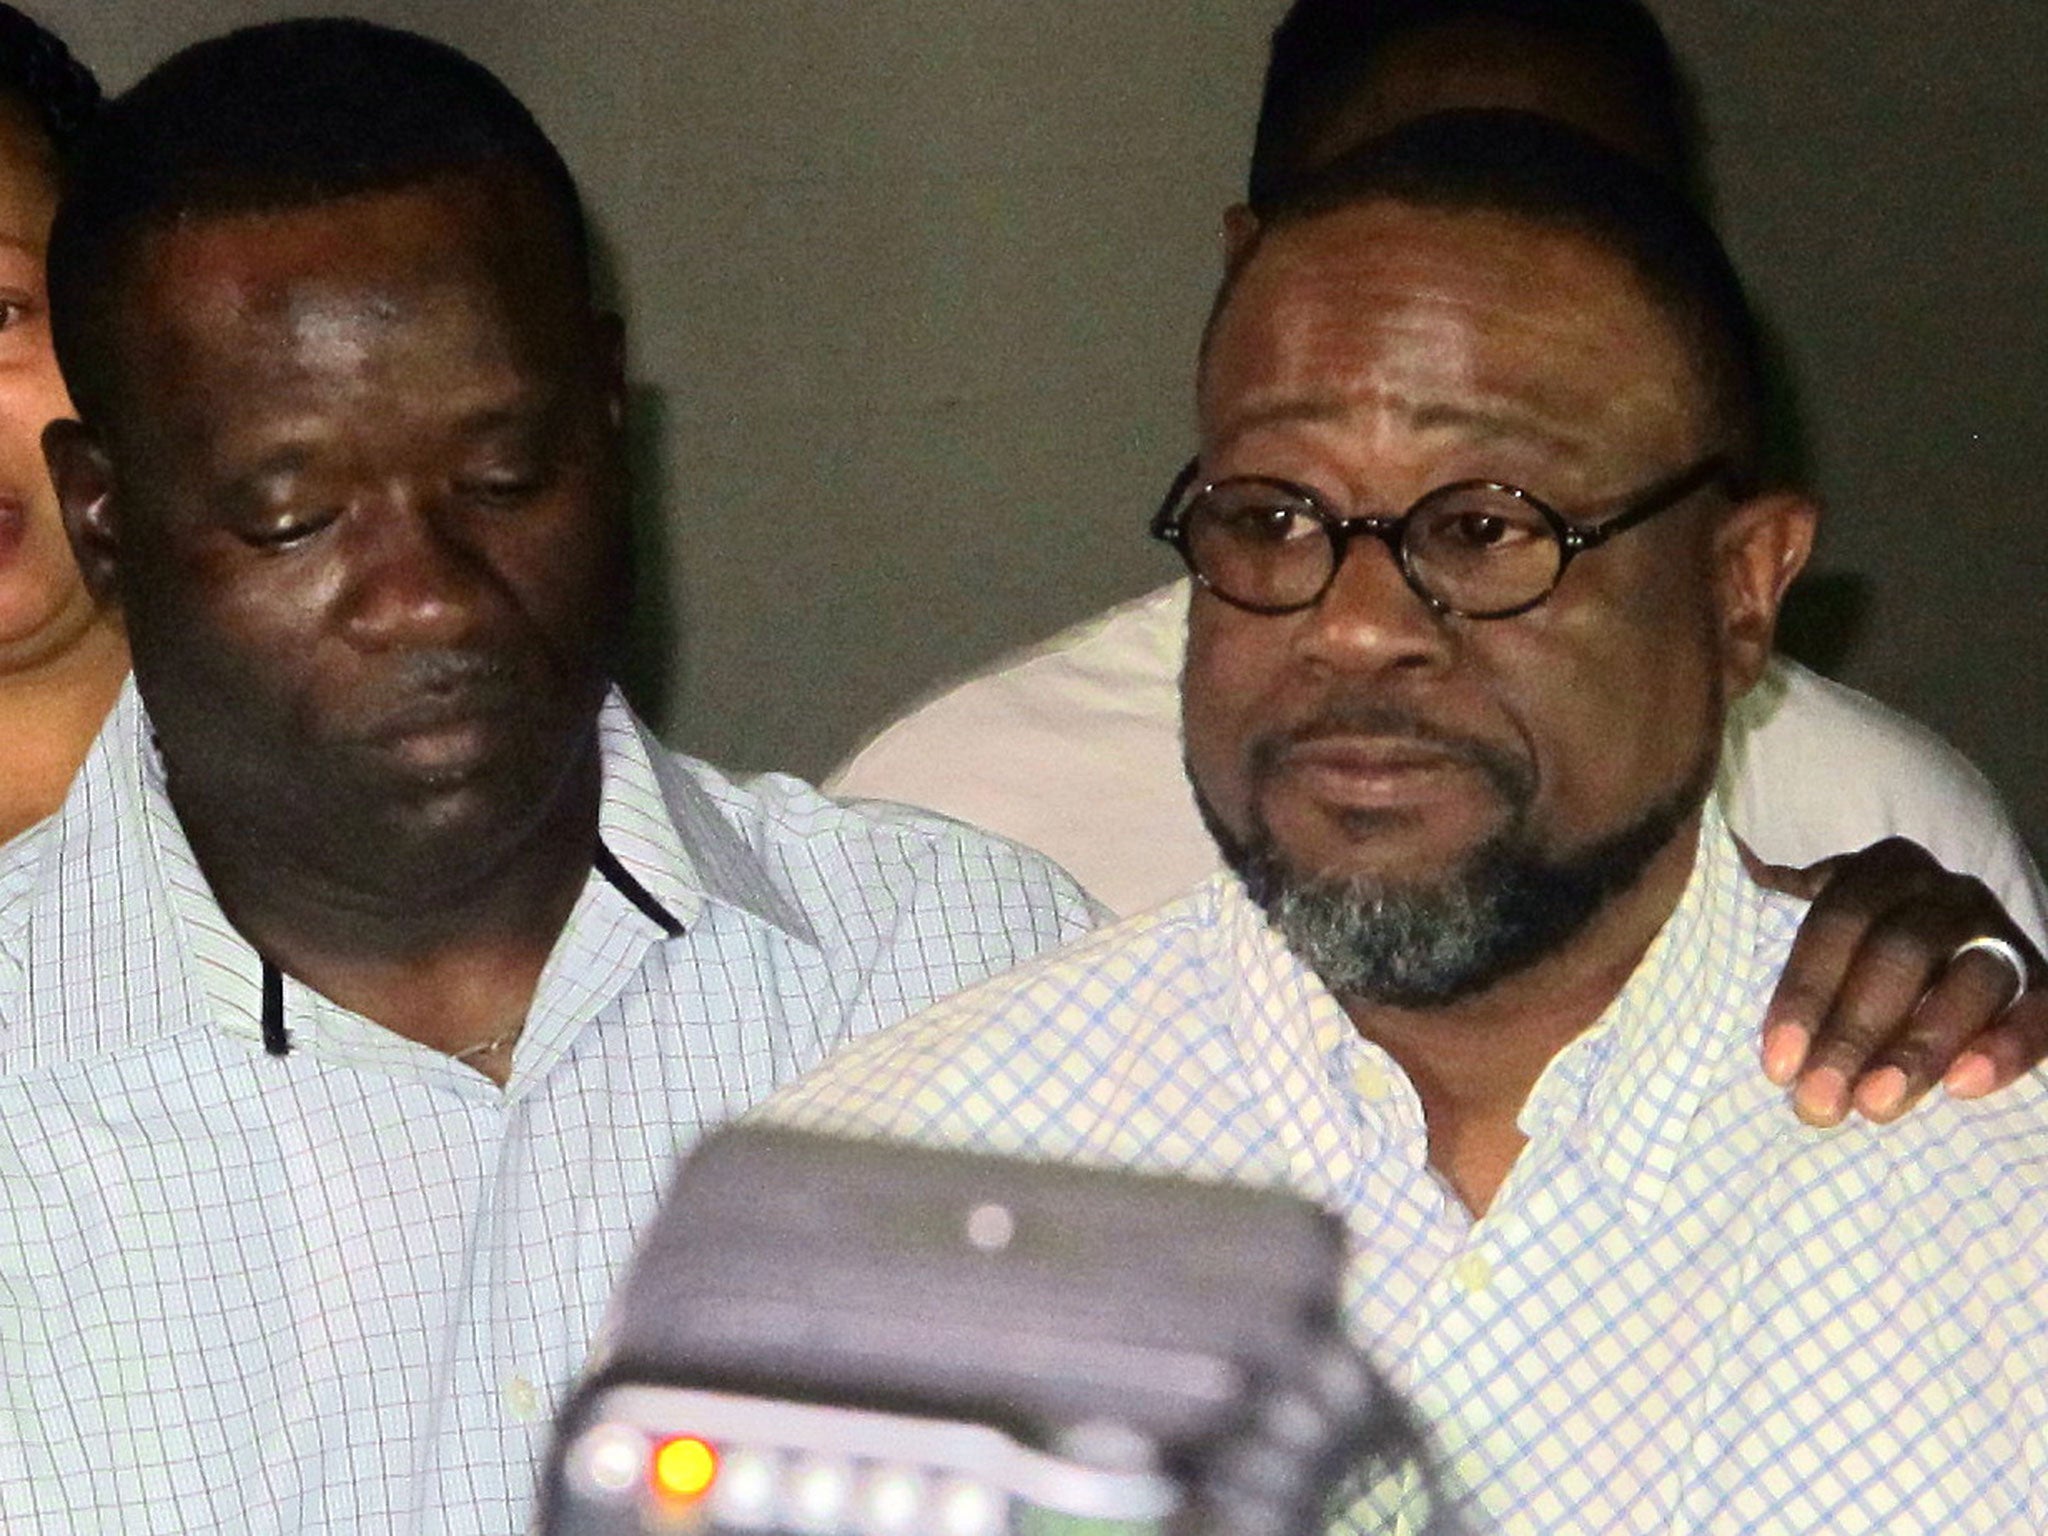 Brothers of Walter Scott, Rodney Scott (L) Anthony Scott (R) appear at a news conference in Charleston after the shooting